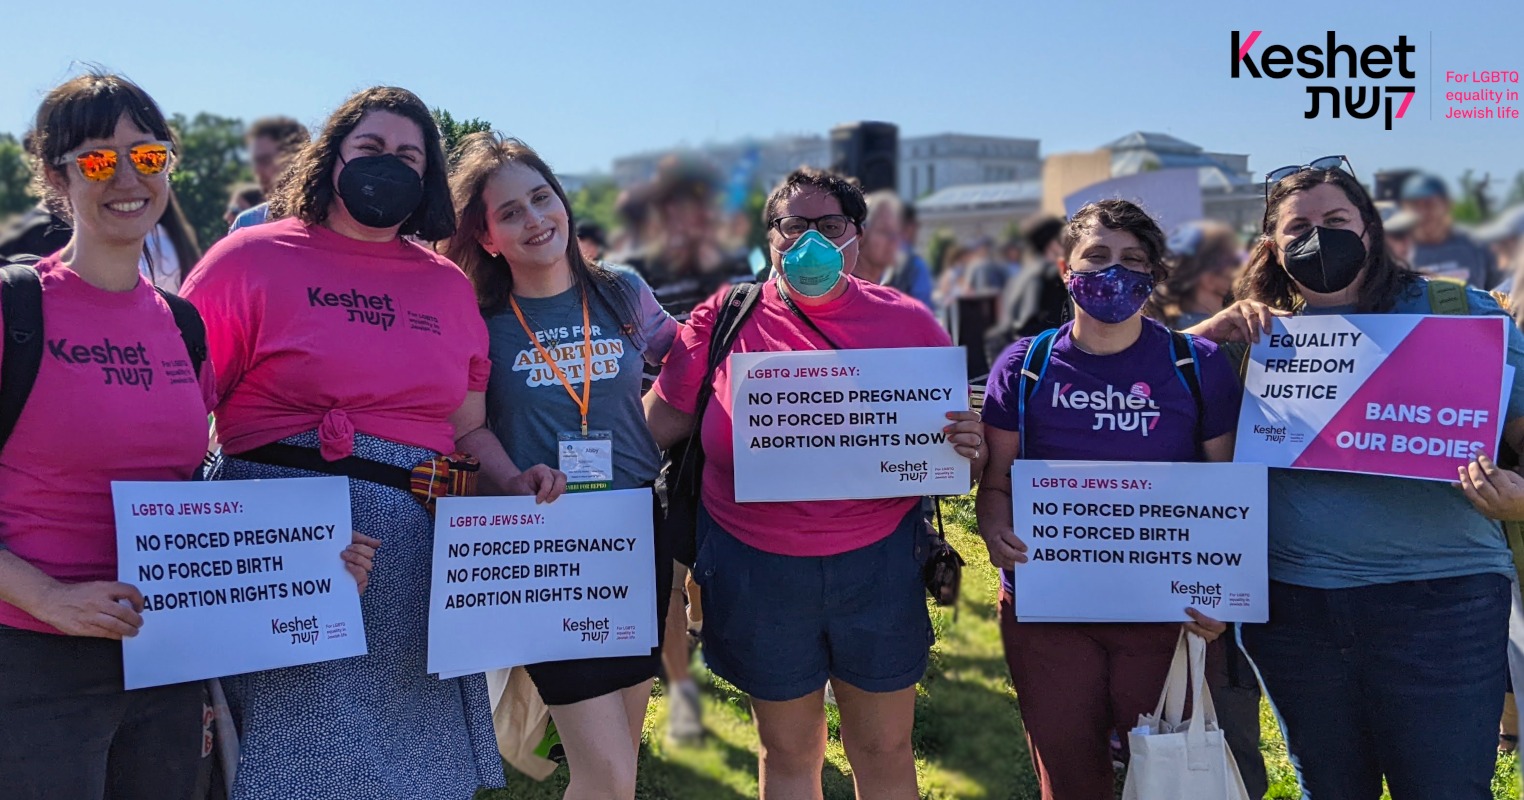 6 people standing outside at a sunny political rally, wearing Keshet t-shirts and holding signs that say "No Forced Pregnancy, No Forced Birth, Abortion Rights Now"